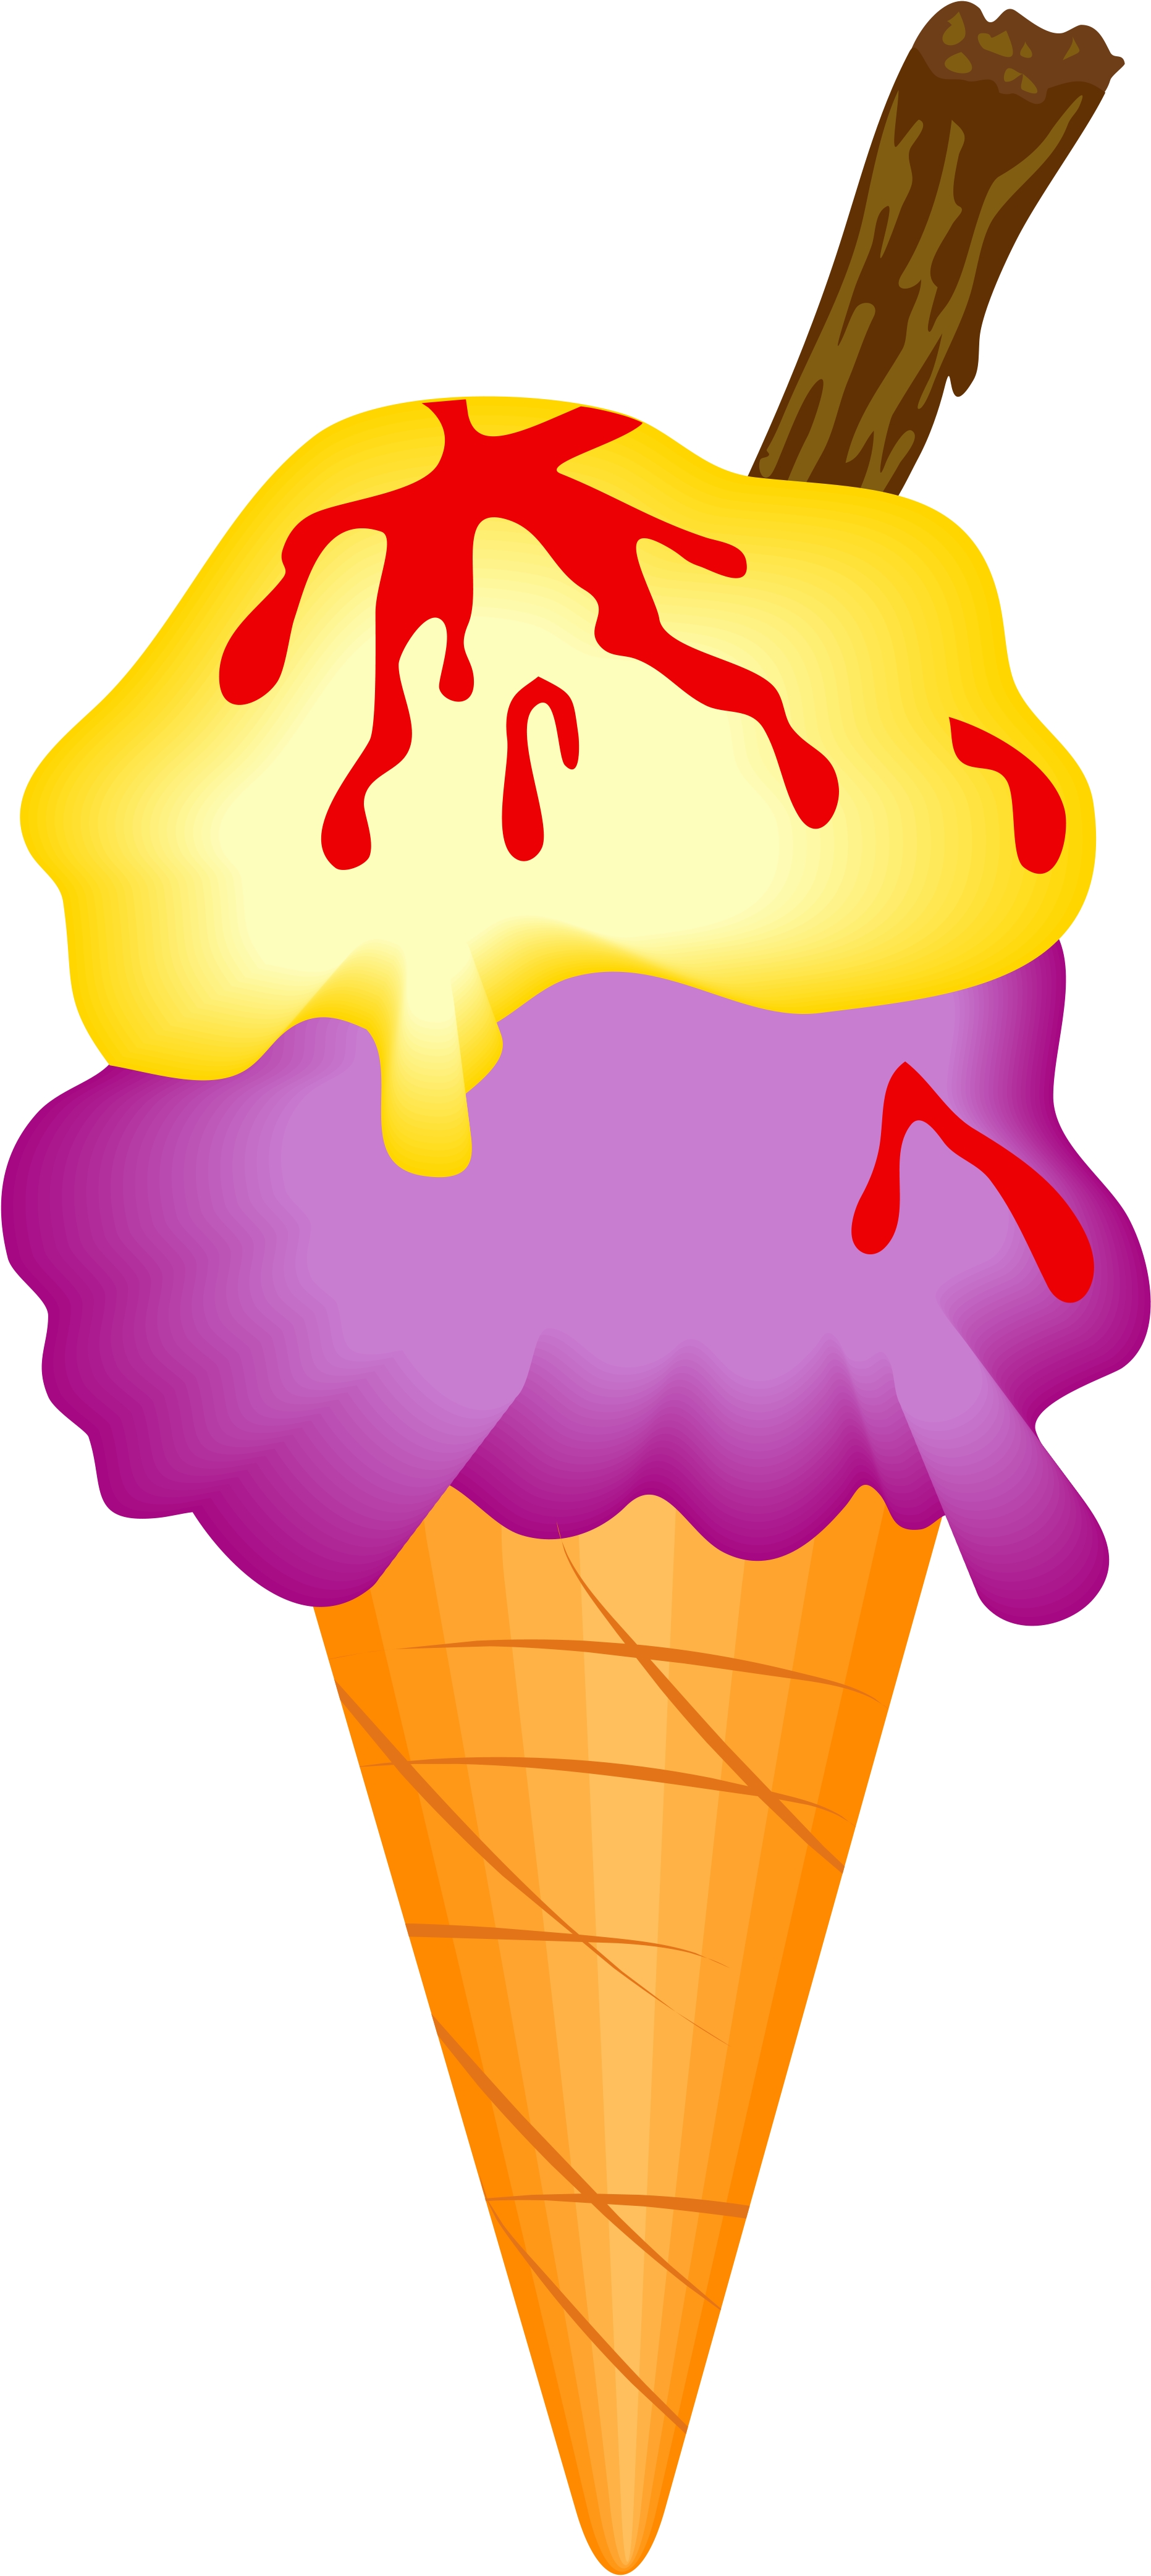 Ice cream cone ice free images at clker vector clip art